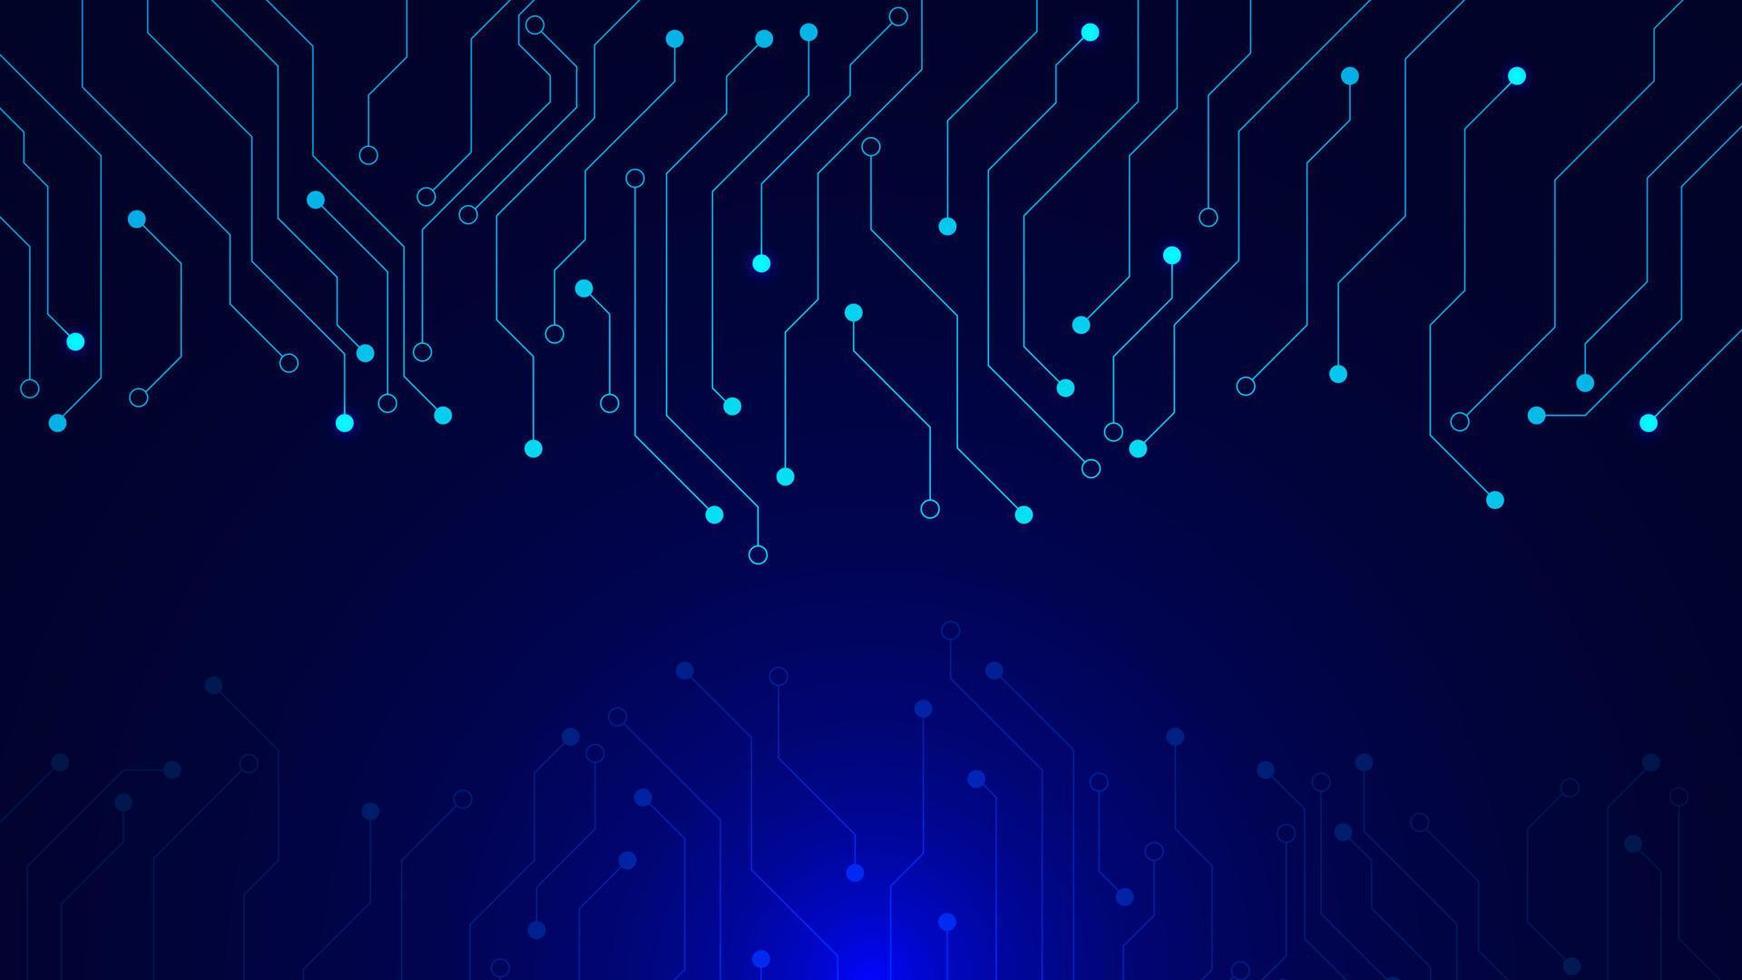 Abstract technology circuit board background. Digital data concept. Vector illustration.